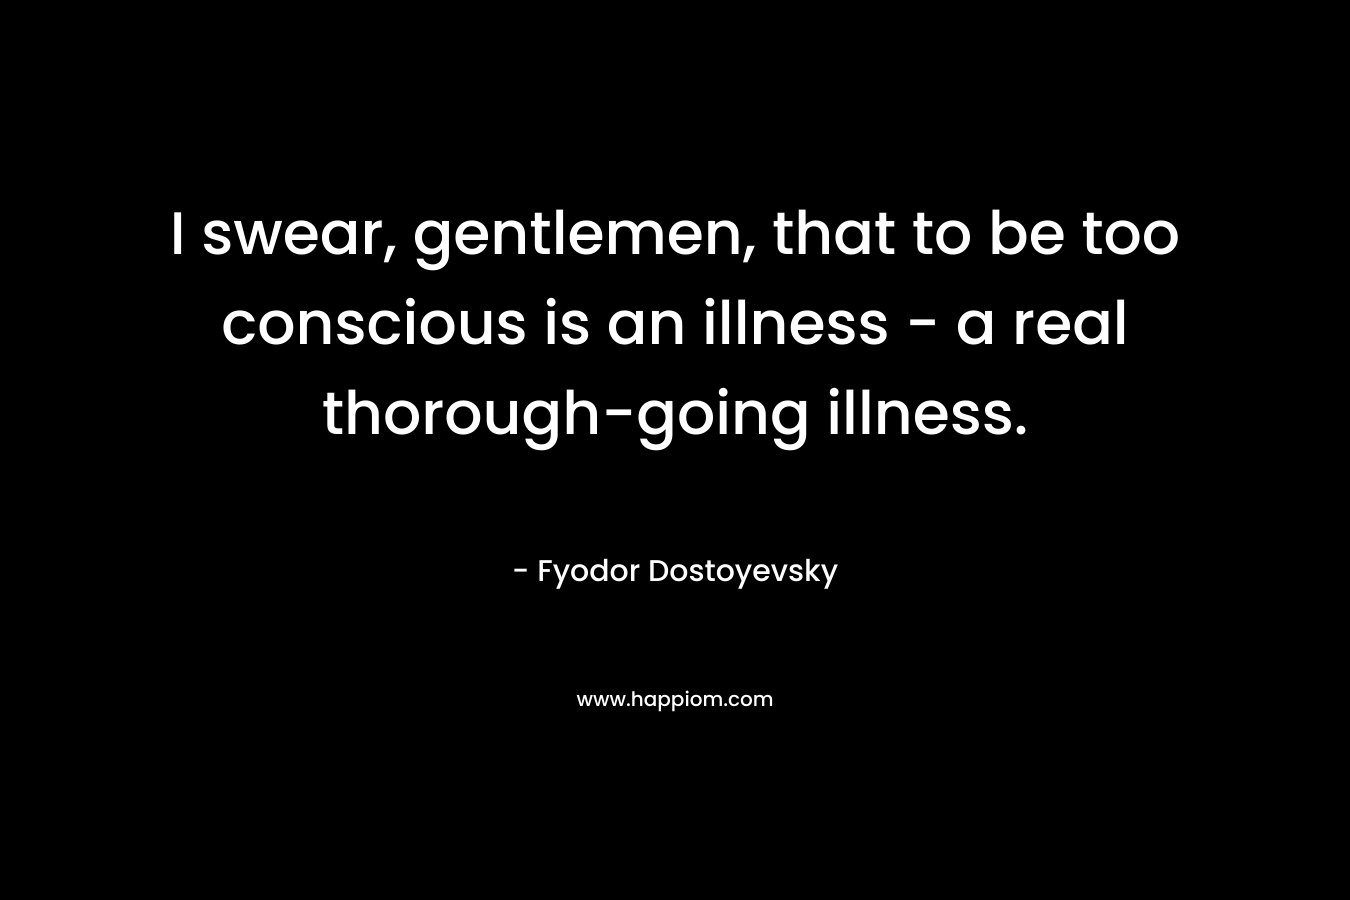 I swear, gentlemen, that to be too conscious is an illness – a real thorough-going illness. – Fyodor Dostoyevsky